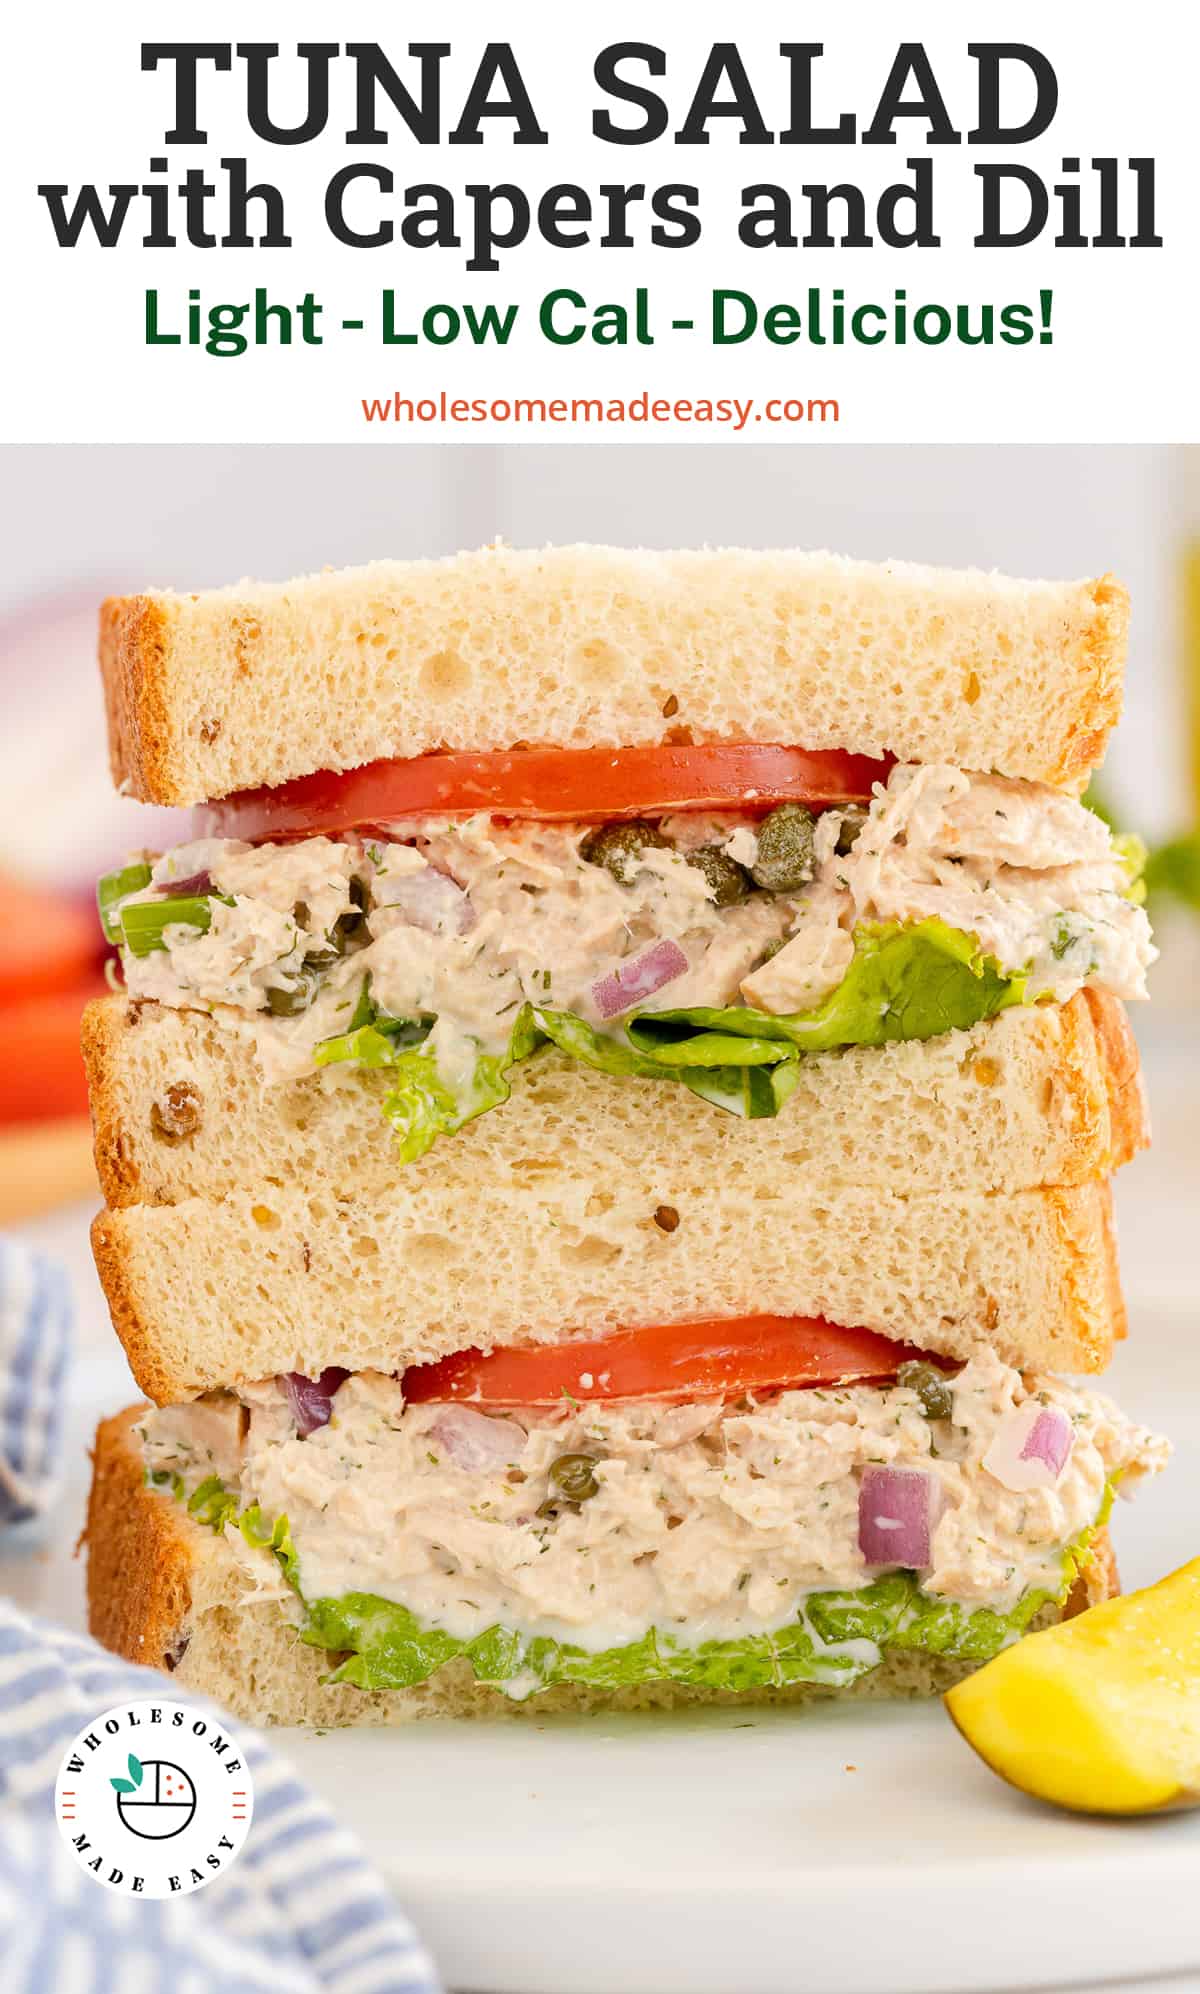 A tuna sandwich cut in half and stacked on a plate with overlay text.